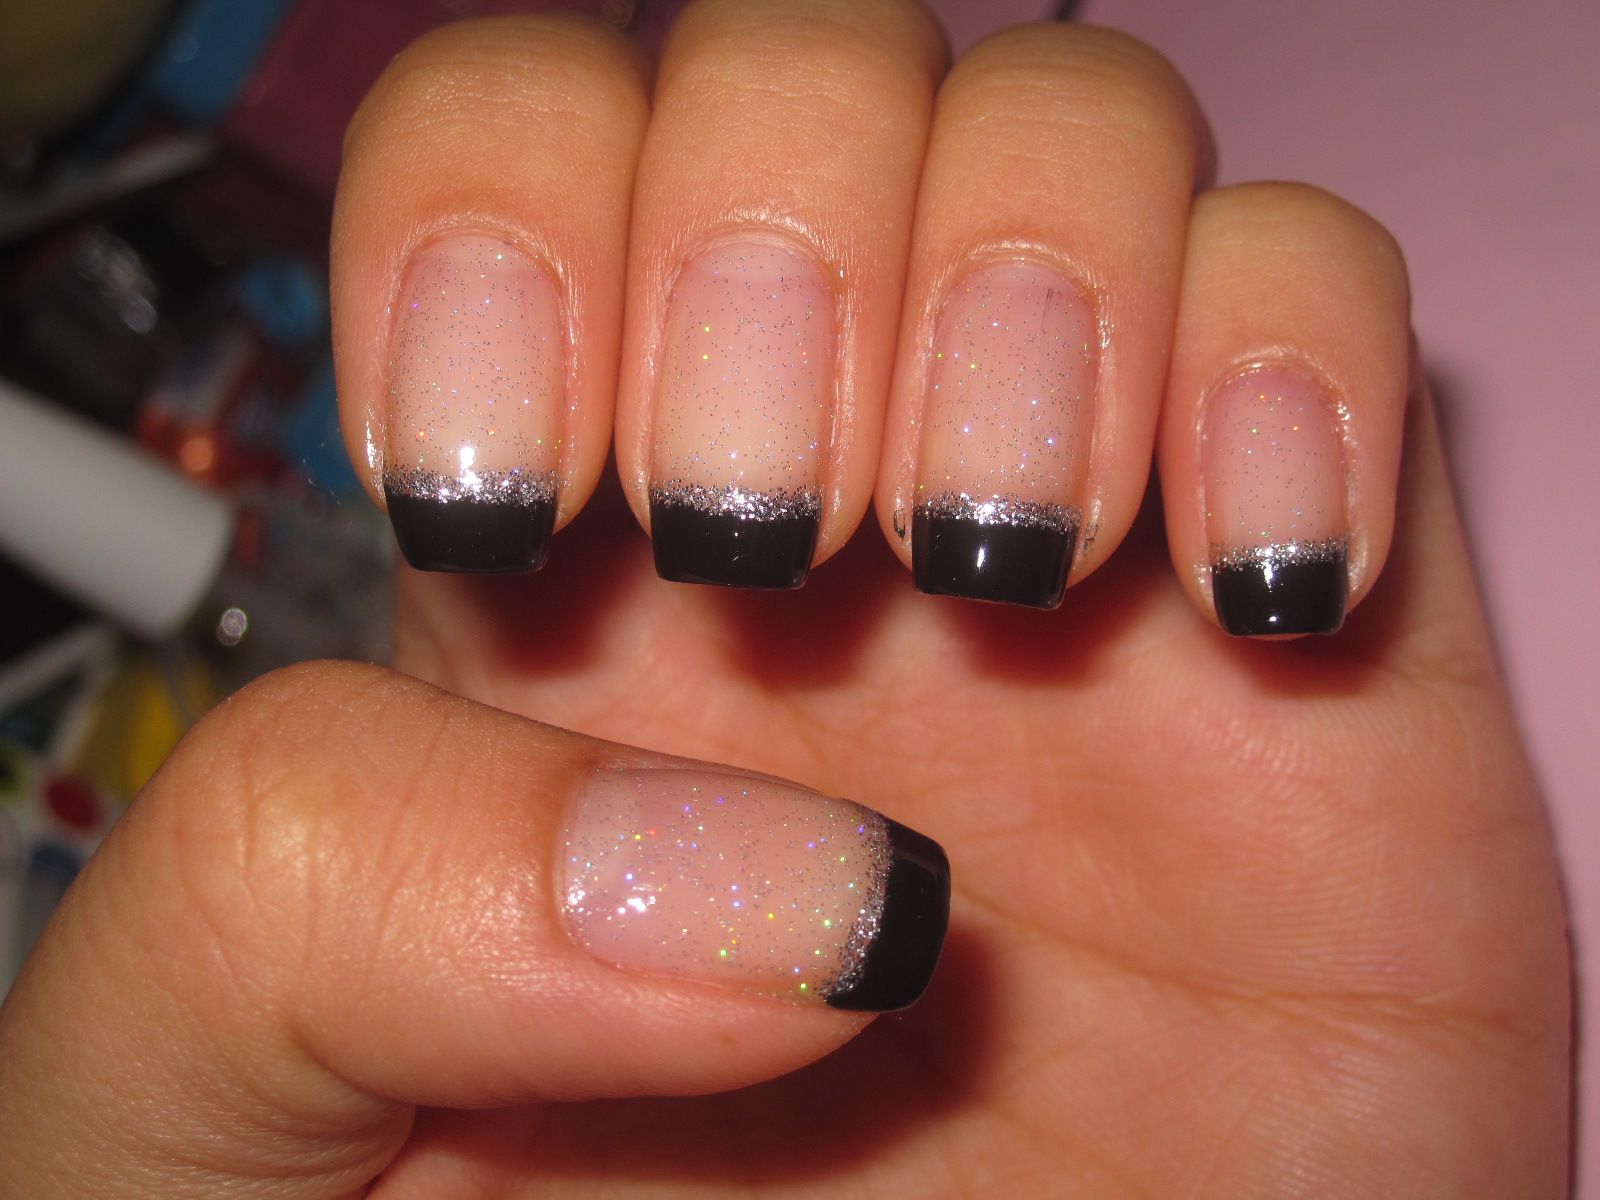 4. Black and Silver French Tip Nail Art - wide 5